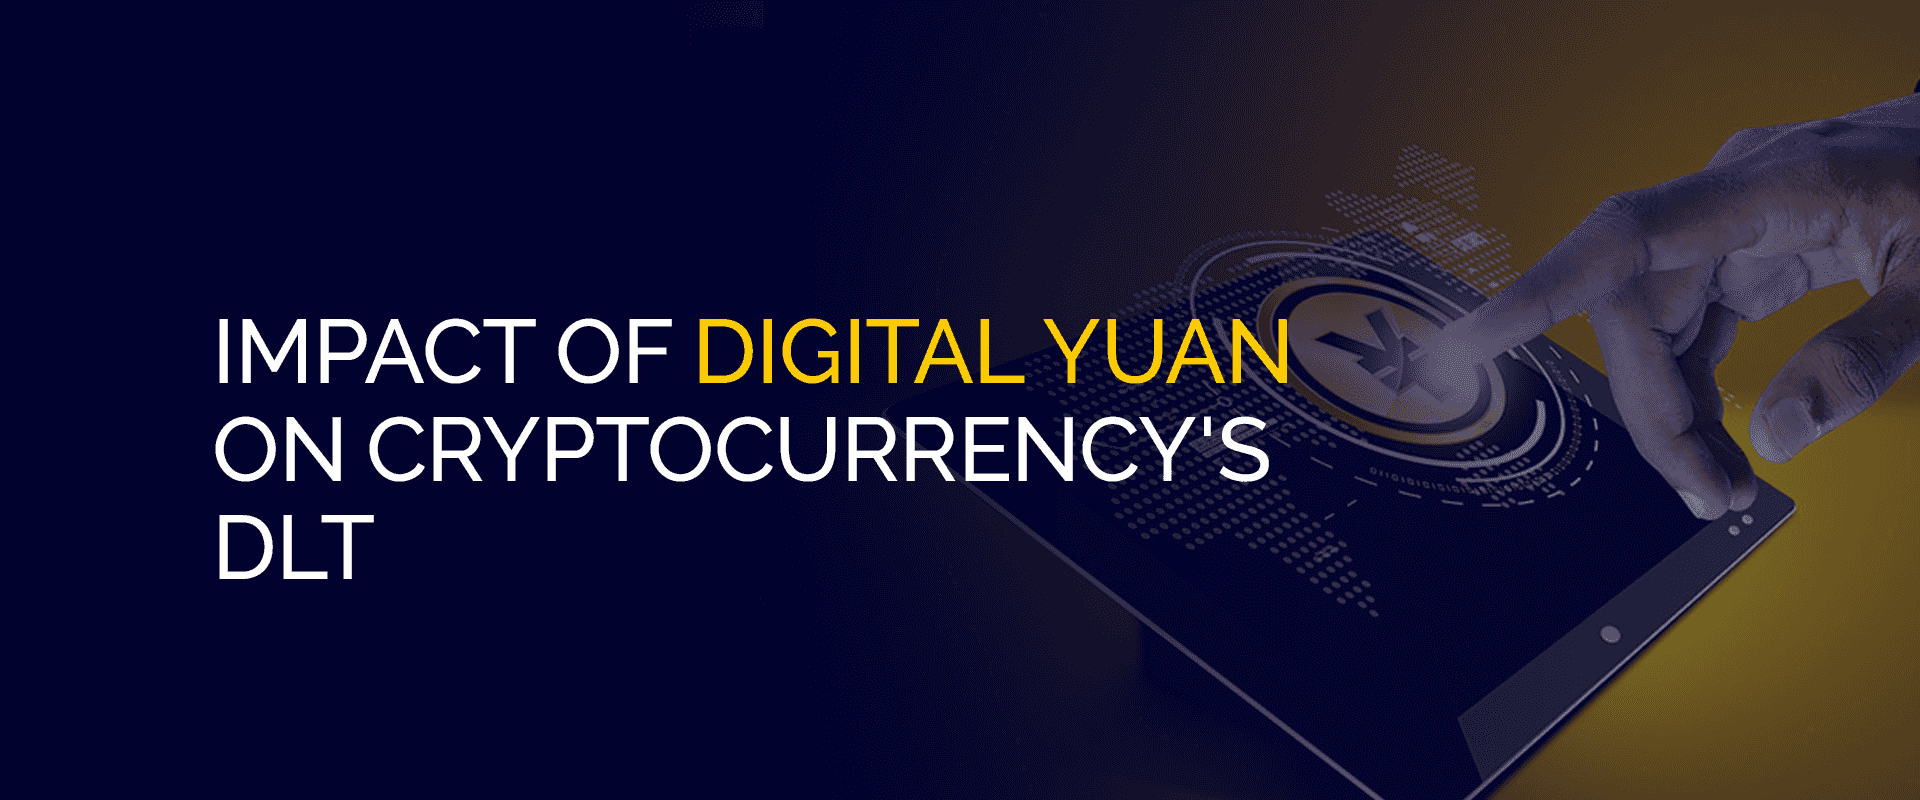 Impact of Digital Yuan on Cryptocurrency's DLT